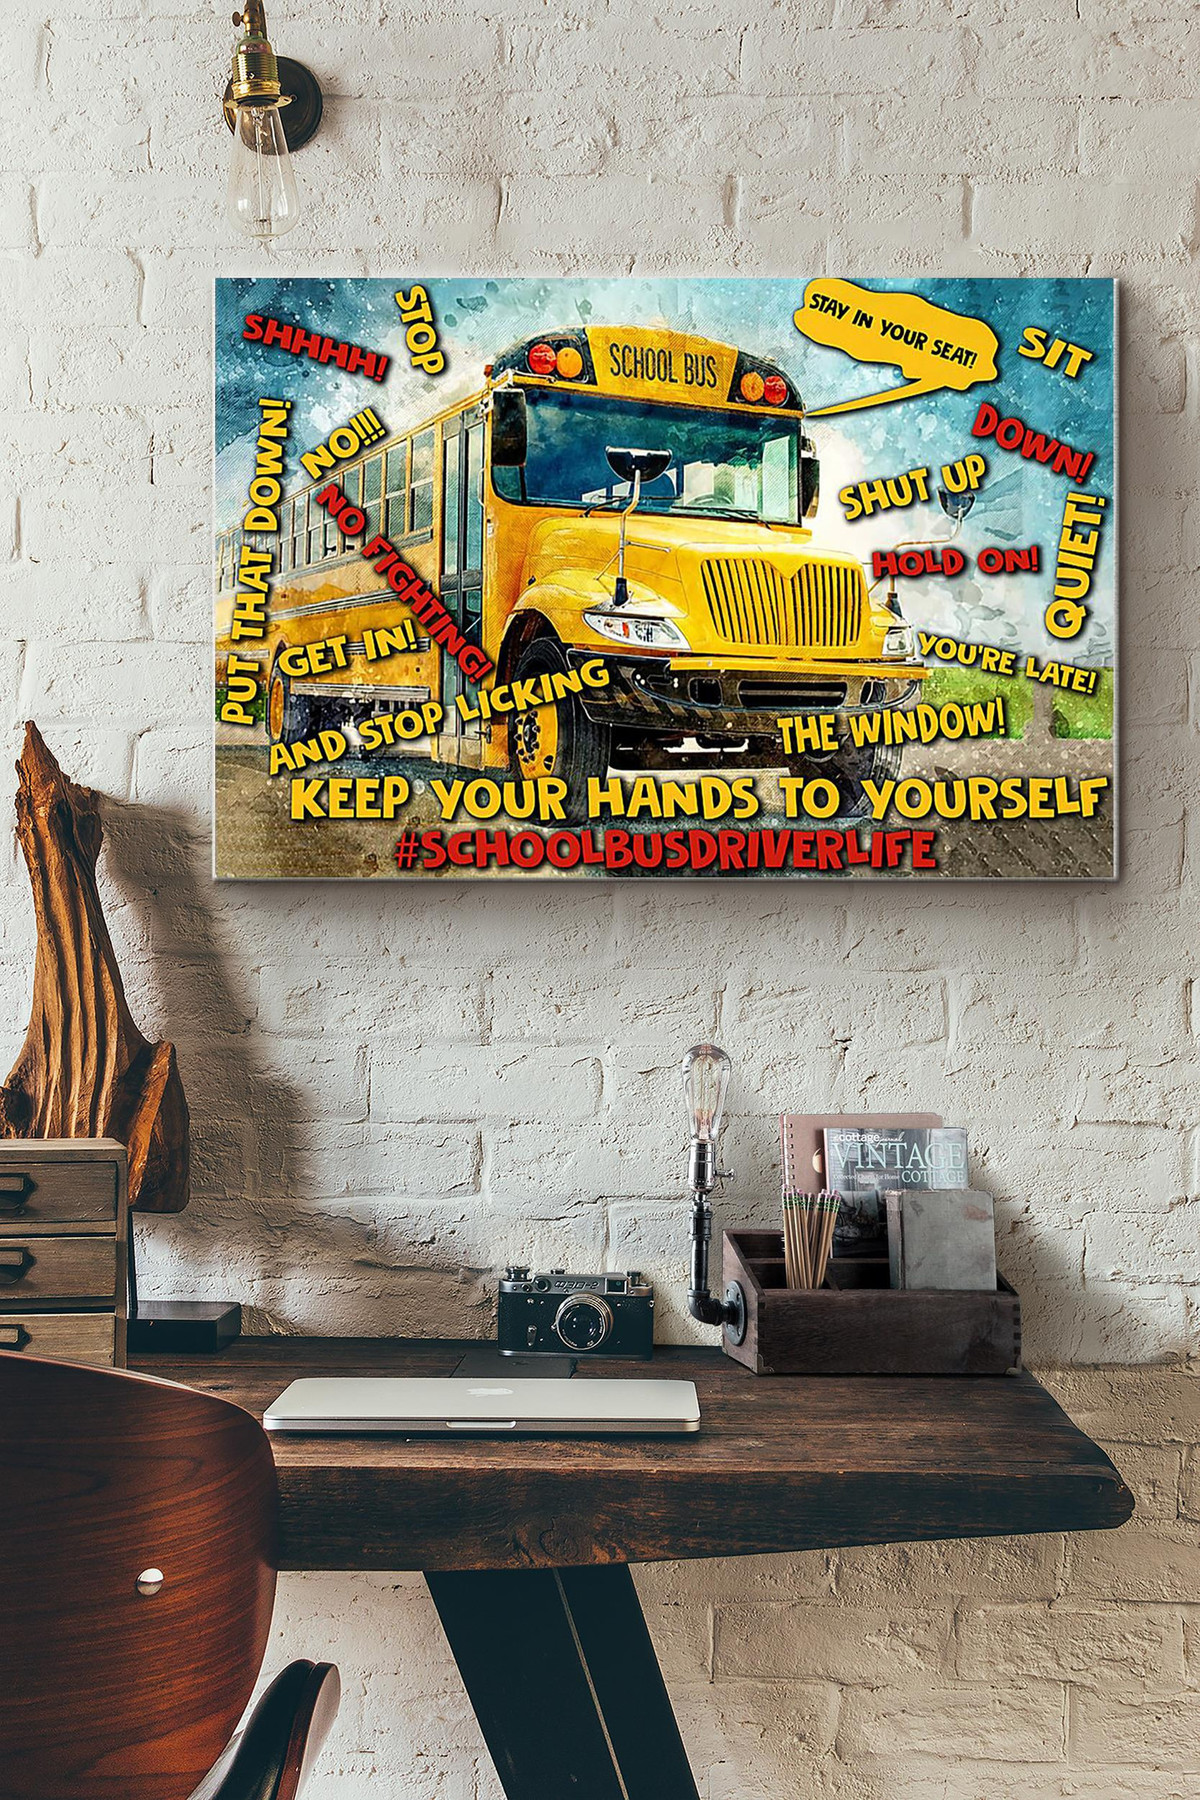 Bus Driver School Bus Driver Life Canvas Painting Ideas, Canvas Hanging Prints, Gift Idea Framed Prints, Canvas Paintings Wrapped Canvas 8x10